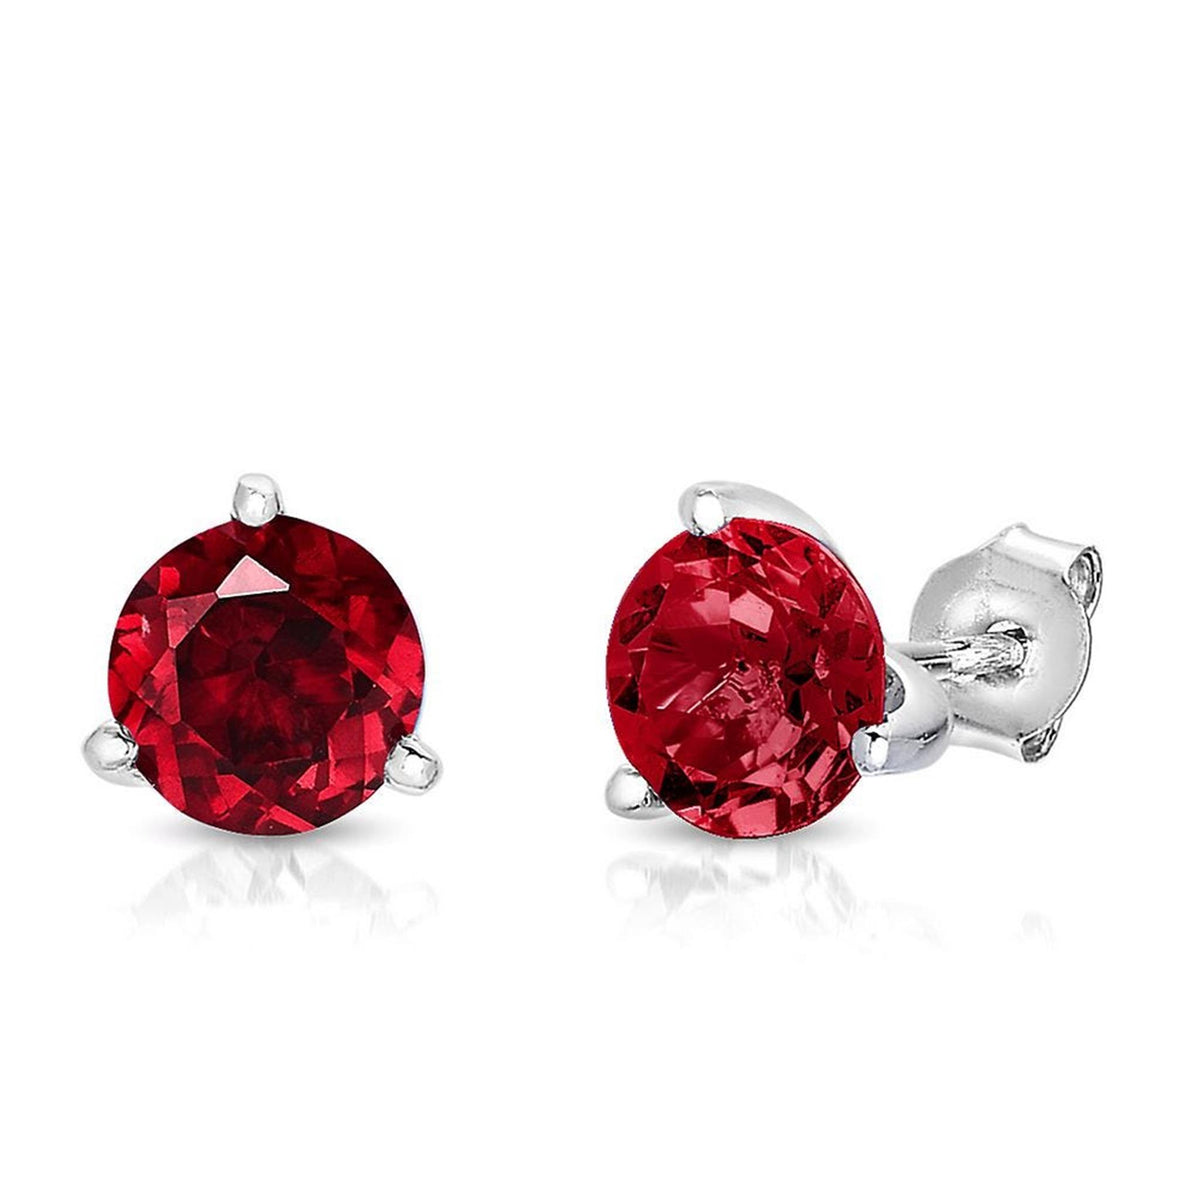 14Kt White Gold Classic Stud Earrings Gemstone Earrings With 1.35ct Chatham Rubies